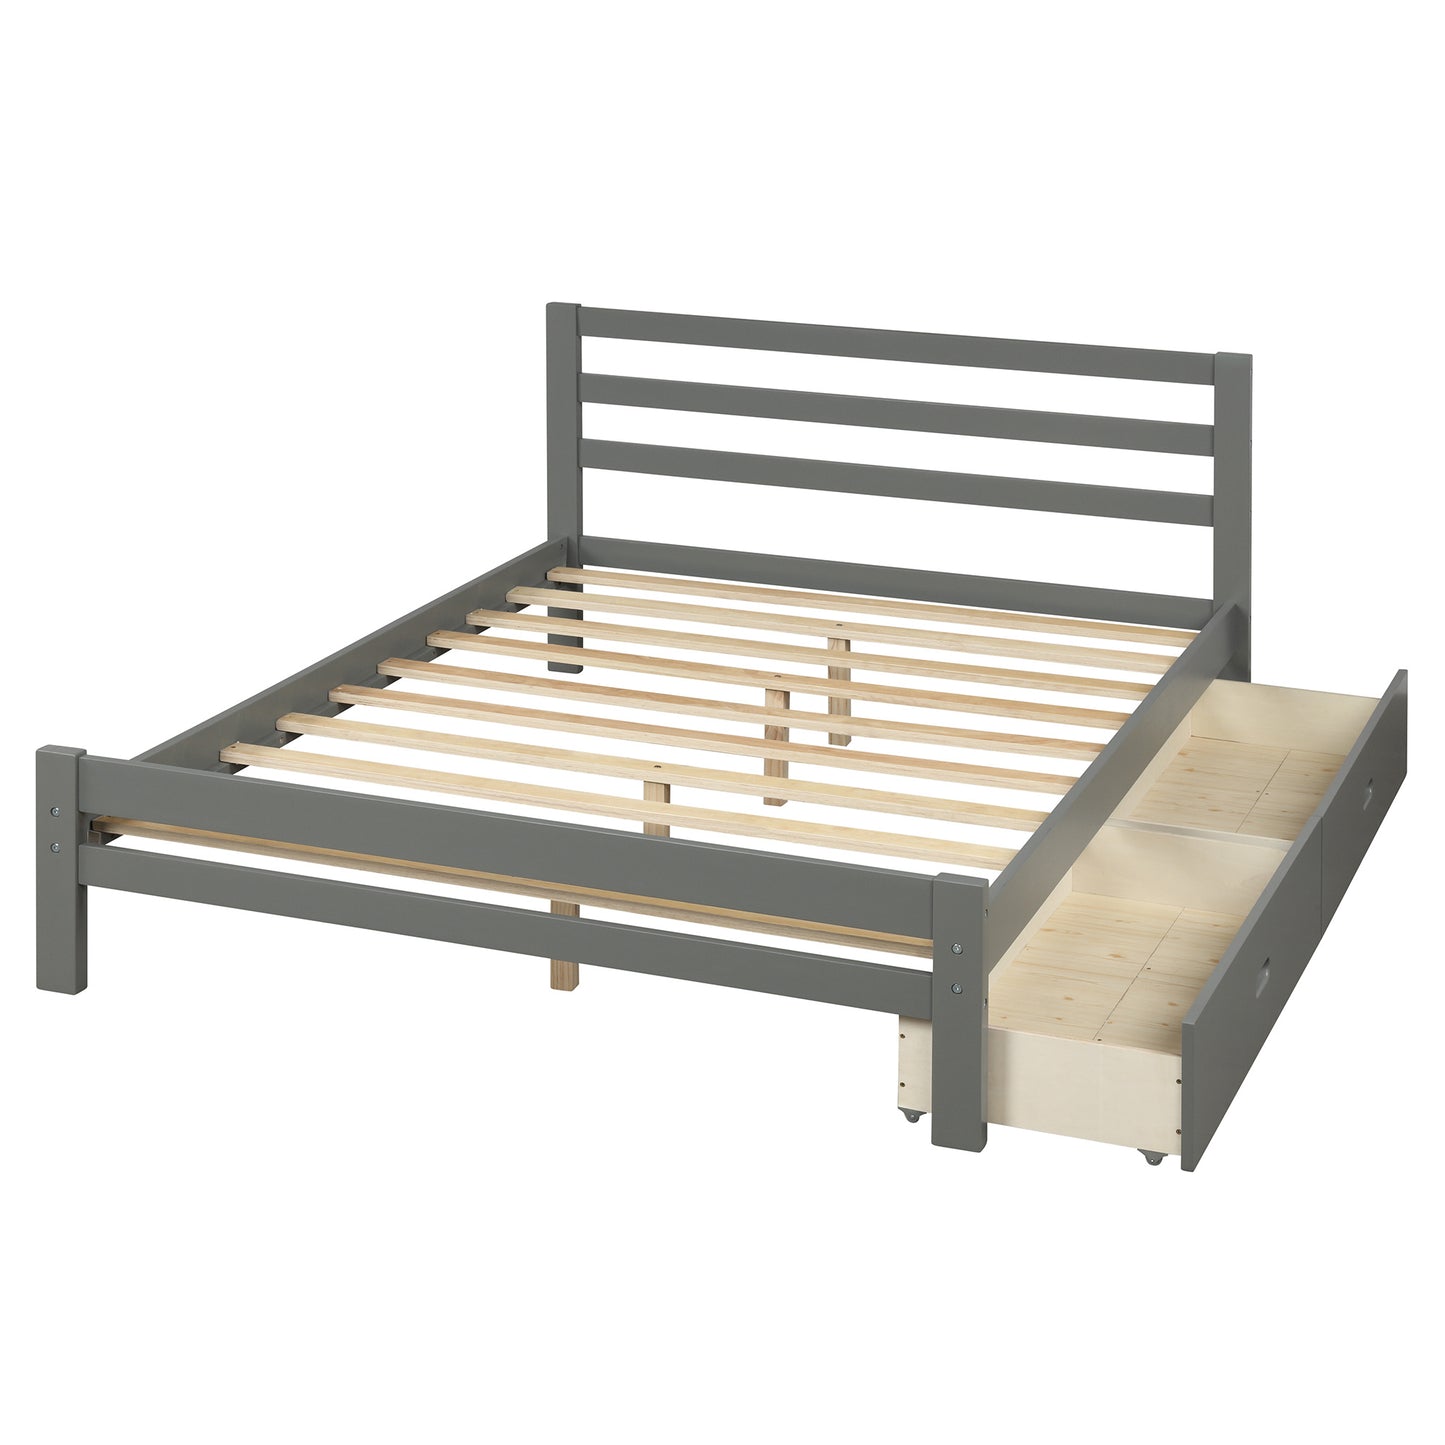 Wood platform bed with two drawers, full